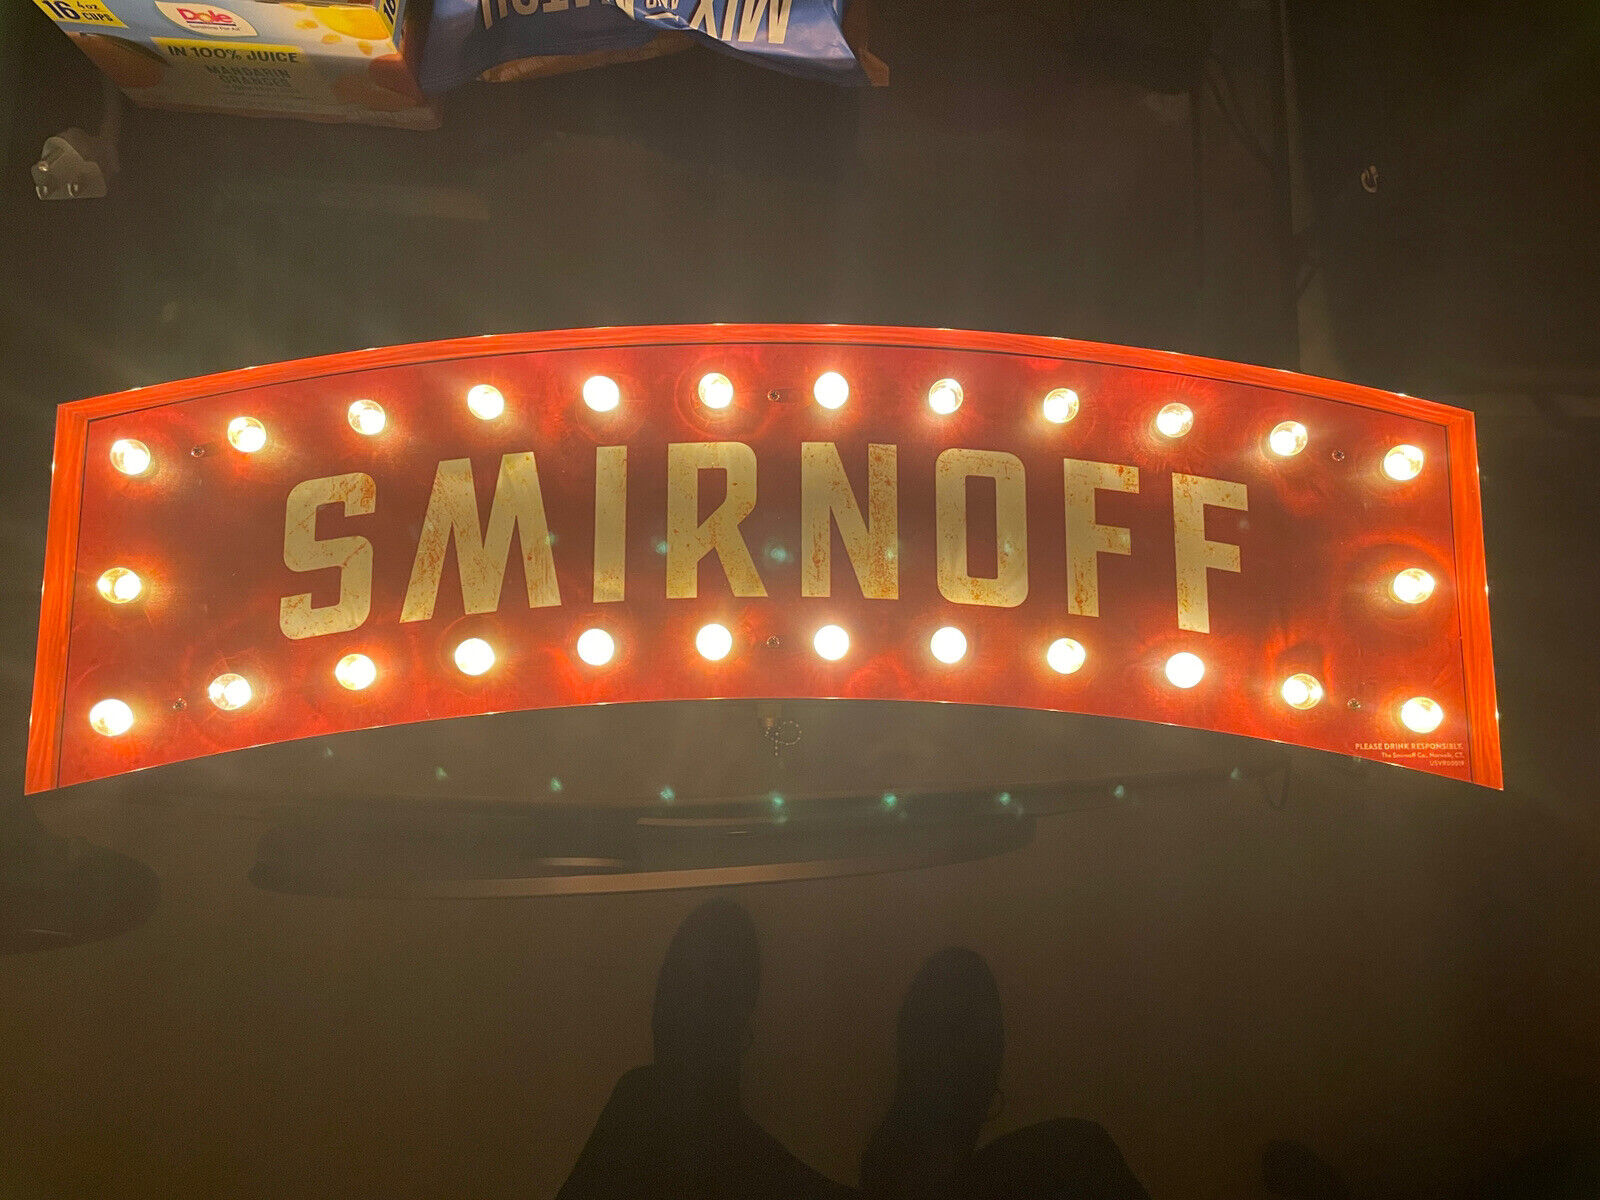 Smirnoff Lighted Sign Led Bulbs Vintage Looking Man Cave, Bar New And Very Rare